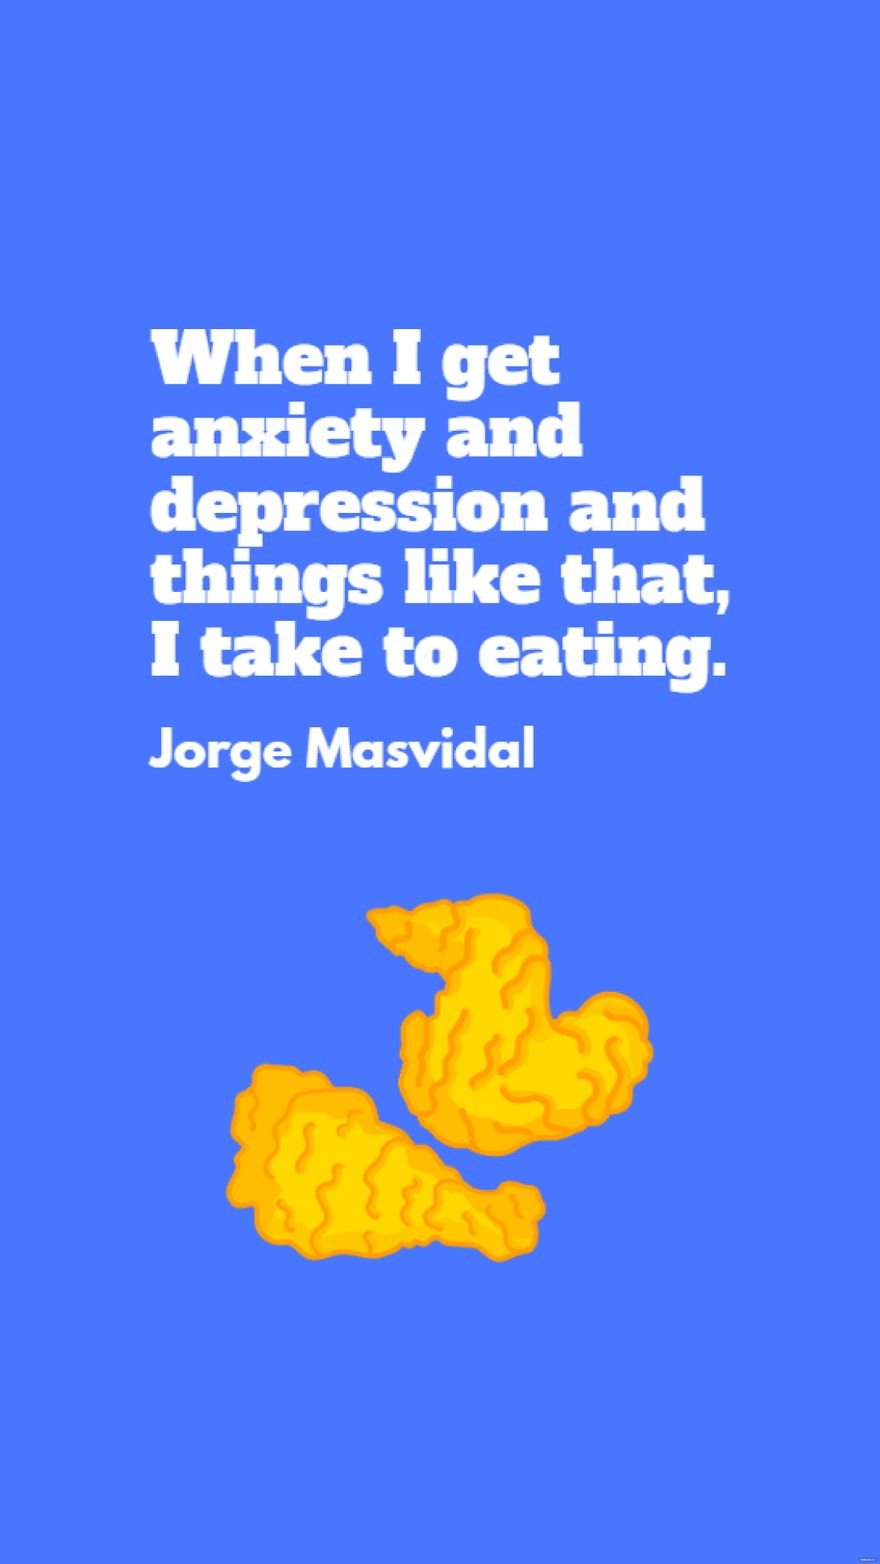 Jorge Masvidal - When I get anxiety and depression and things like that, I take to eating.